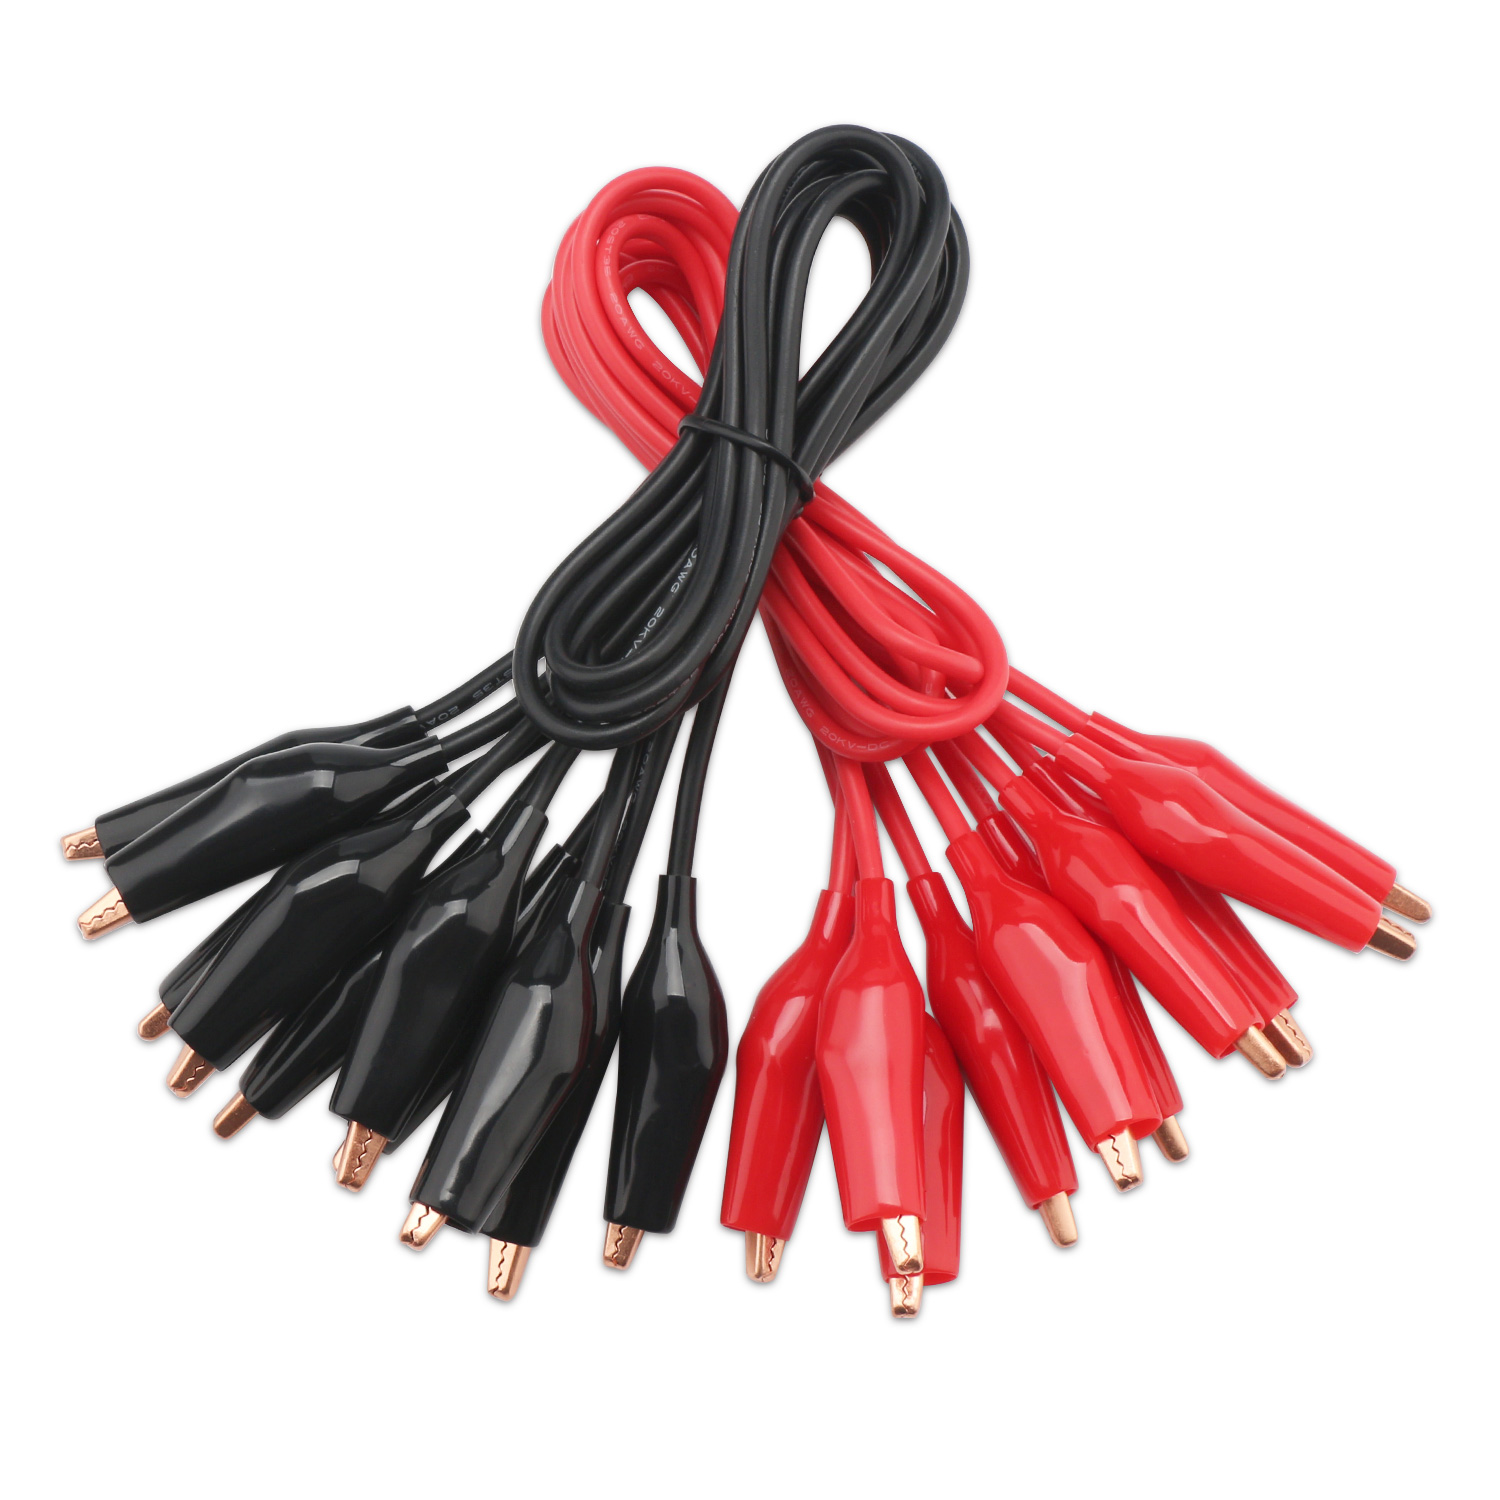 2 Pcs Double Ended PVC Insulated Copper Alligator Clips Multimeter Test Lead Set 